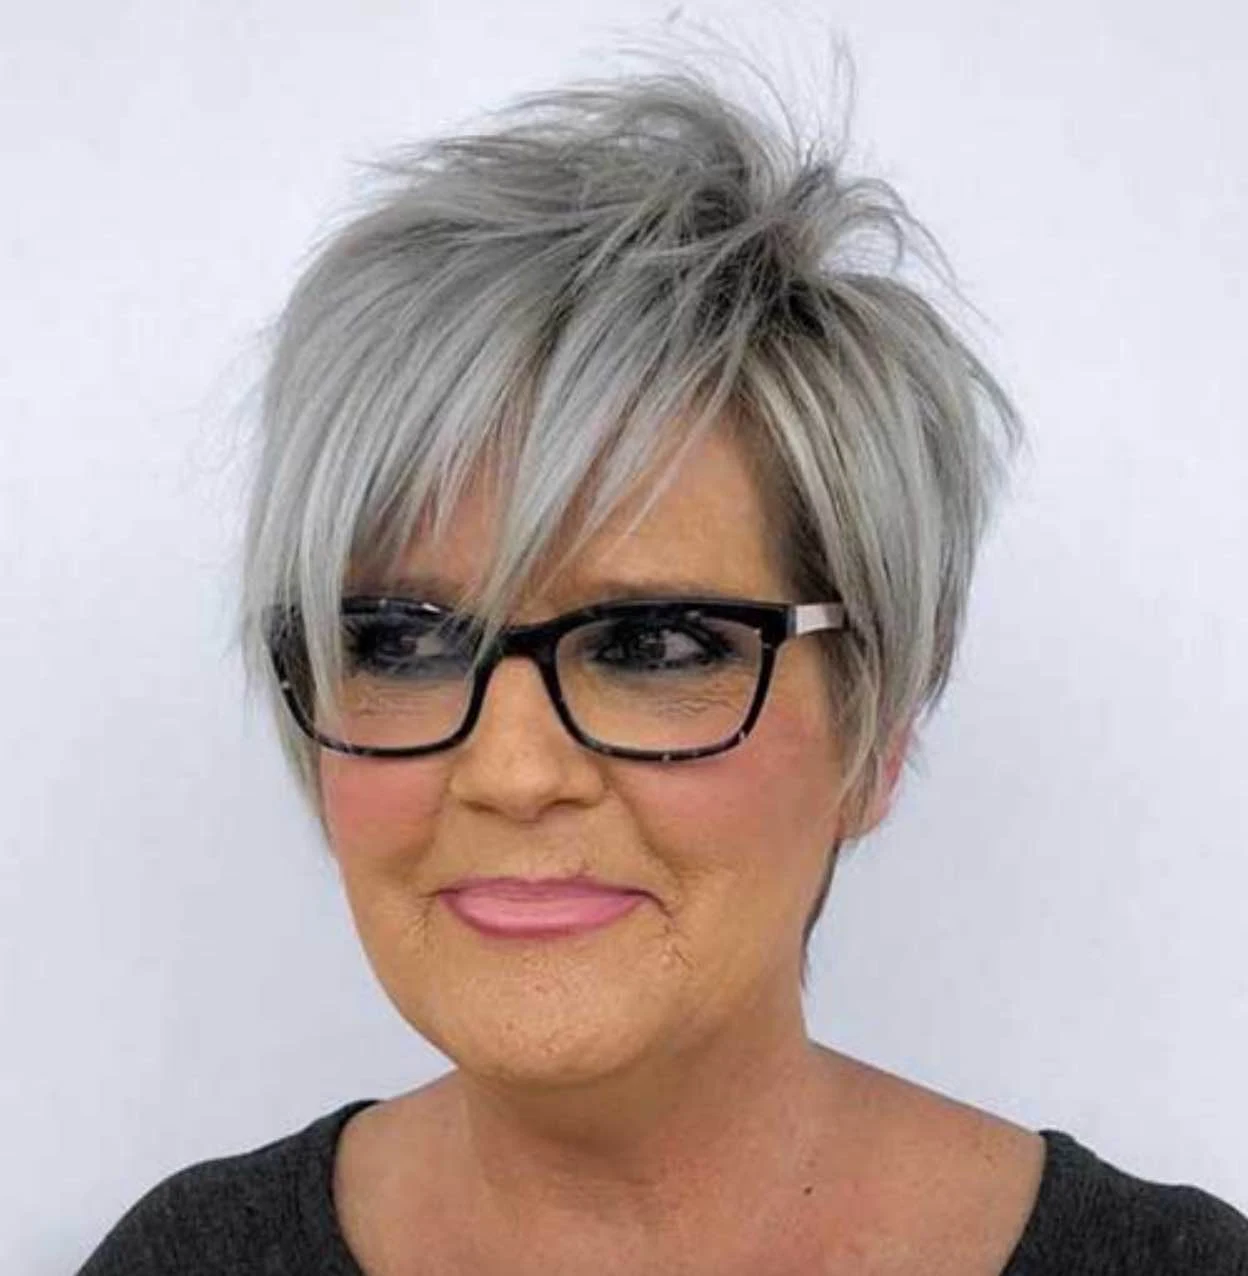 what is the best short hairstyle for over 50